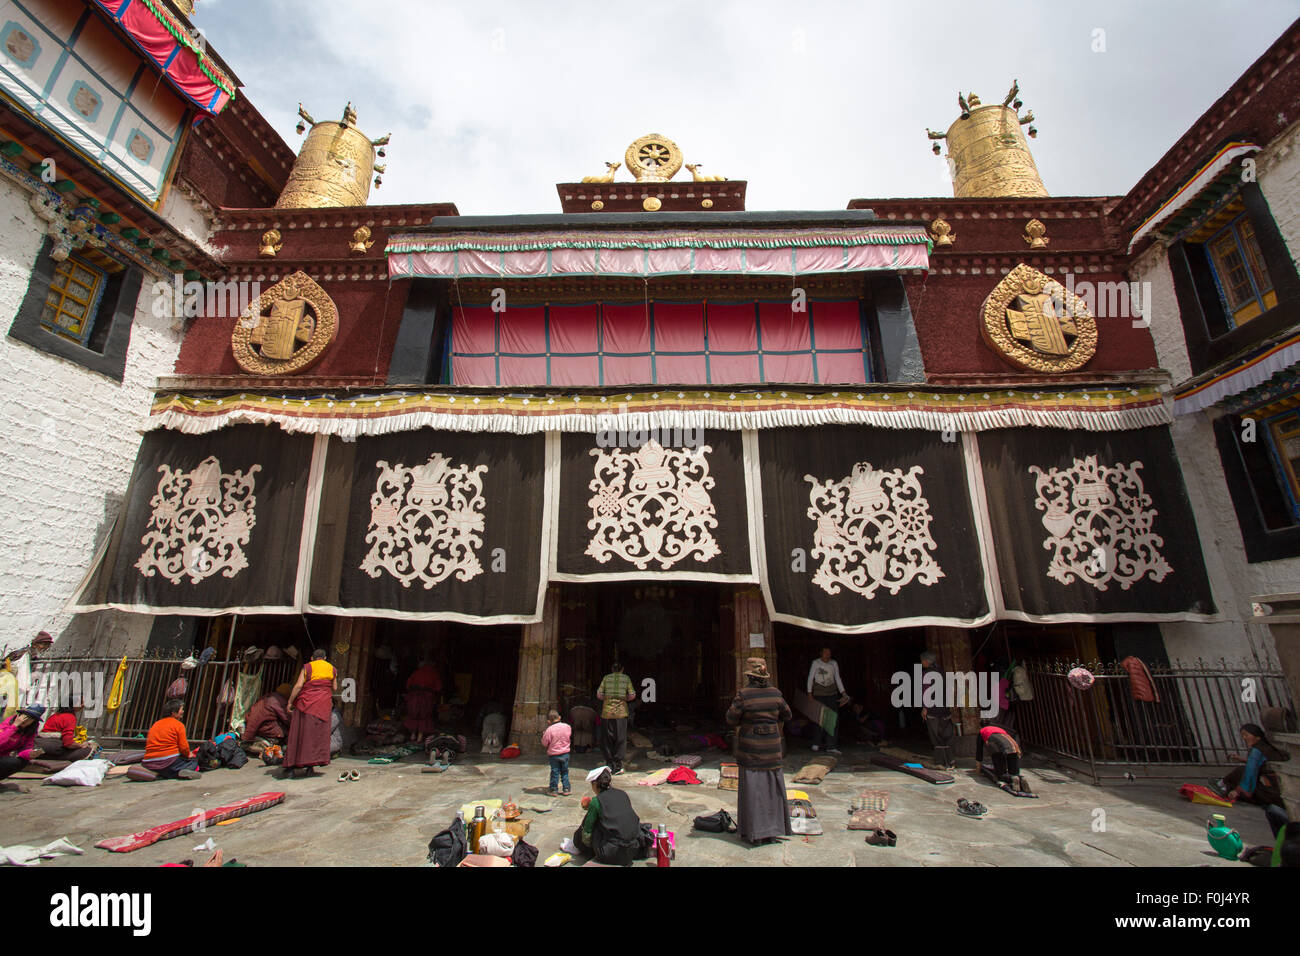 Unidentified group of Tibetan people during a religious ceremony at the Jokhang Temple in Lhasa, Tibet. Stock Photo